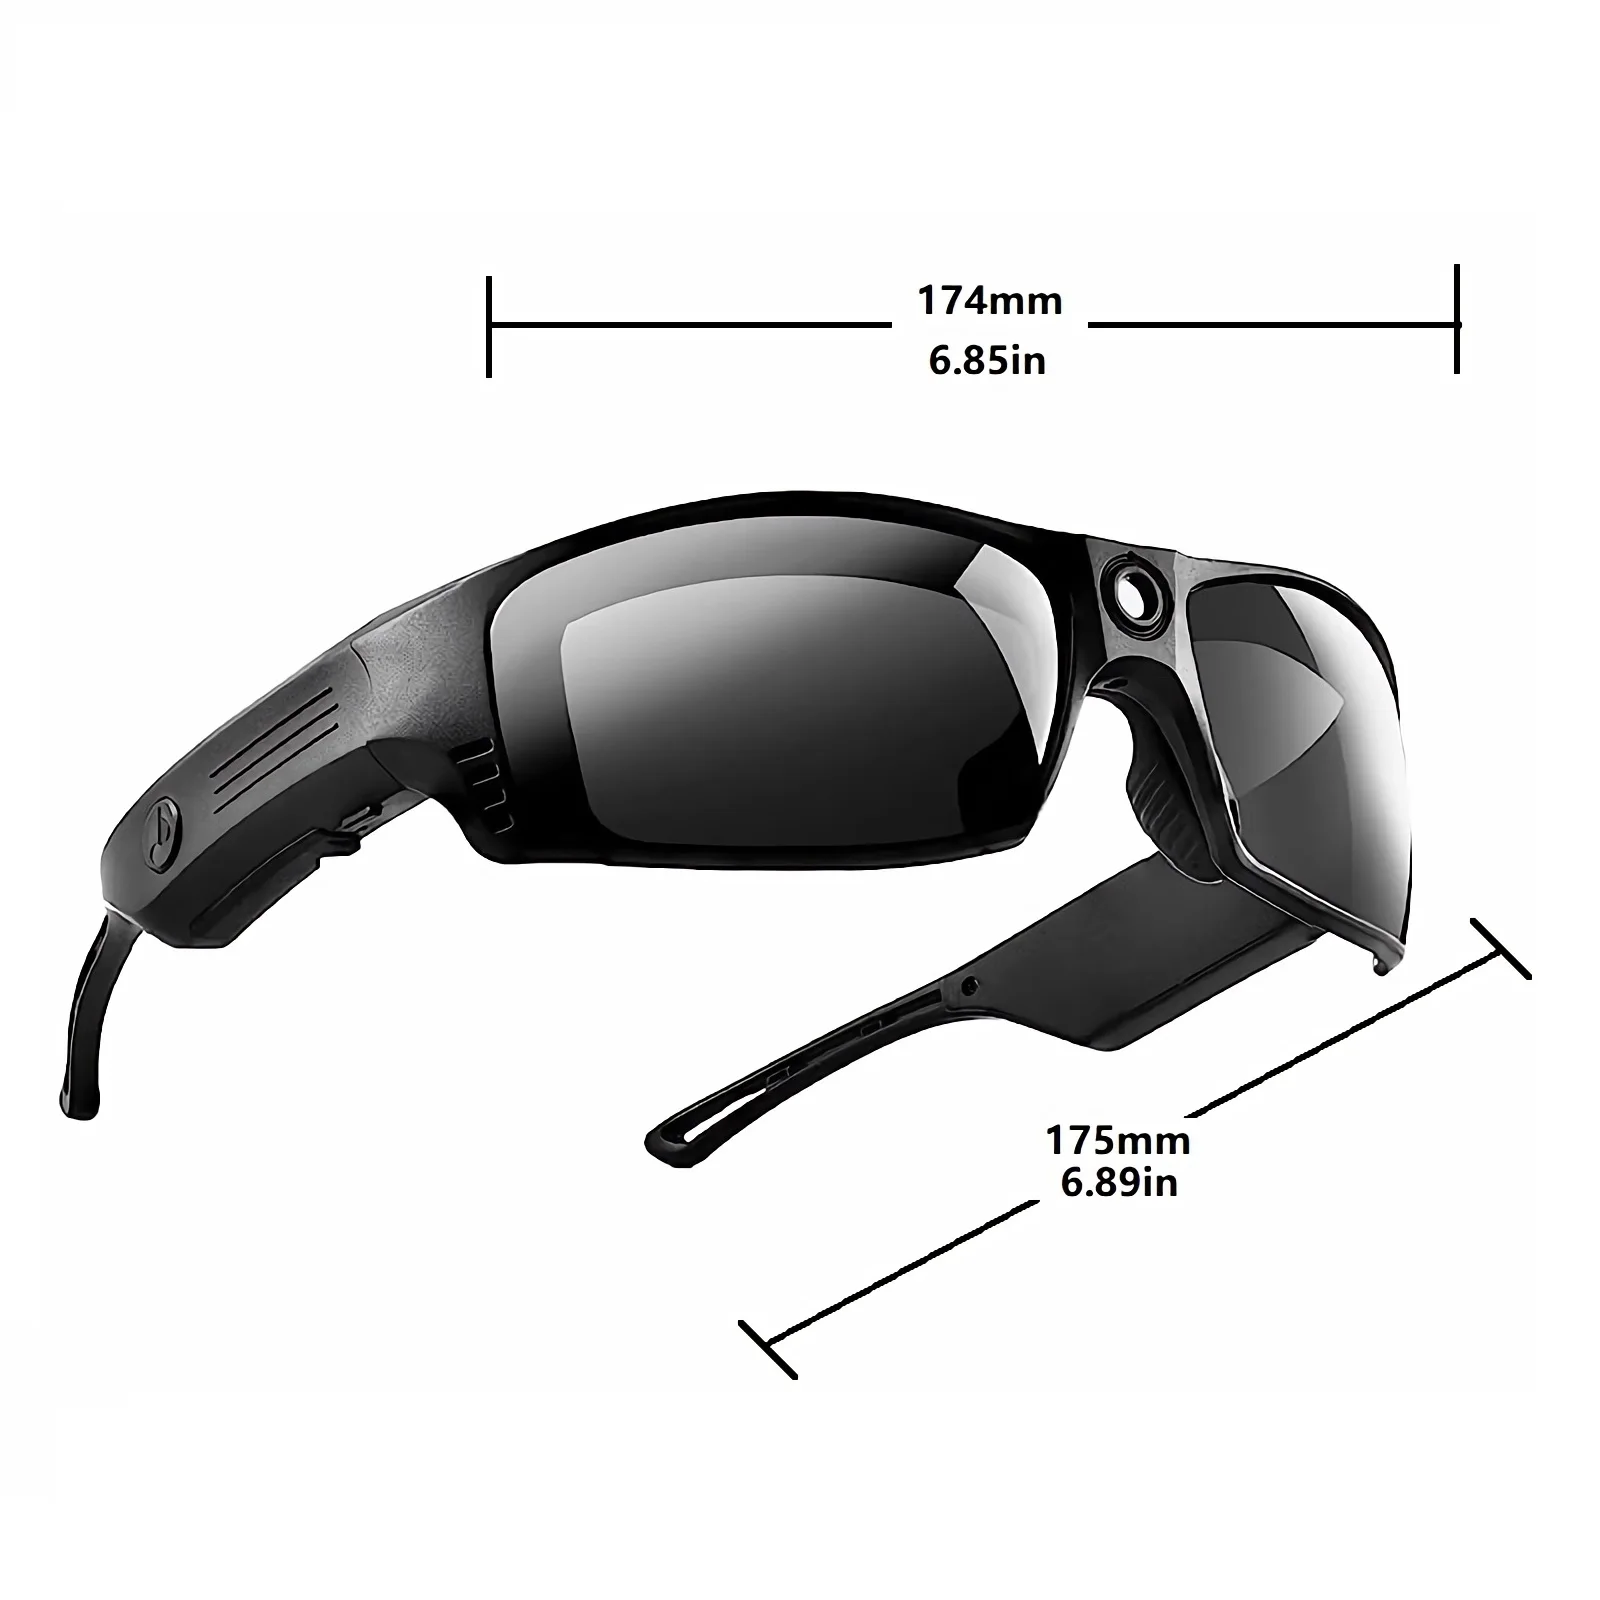 Smart Music Glasses Camera with Bluetooth Earphones,1080P Video for Outdoor Driving Cycling,Eyewear Camcorder,Mini Camera